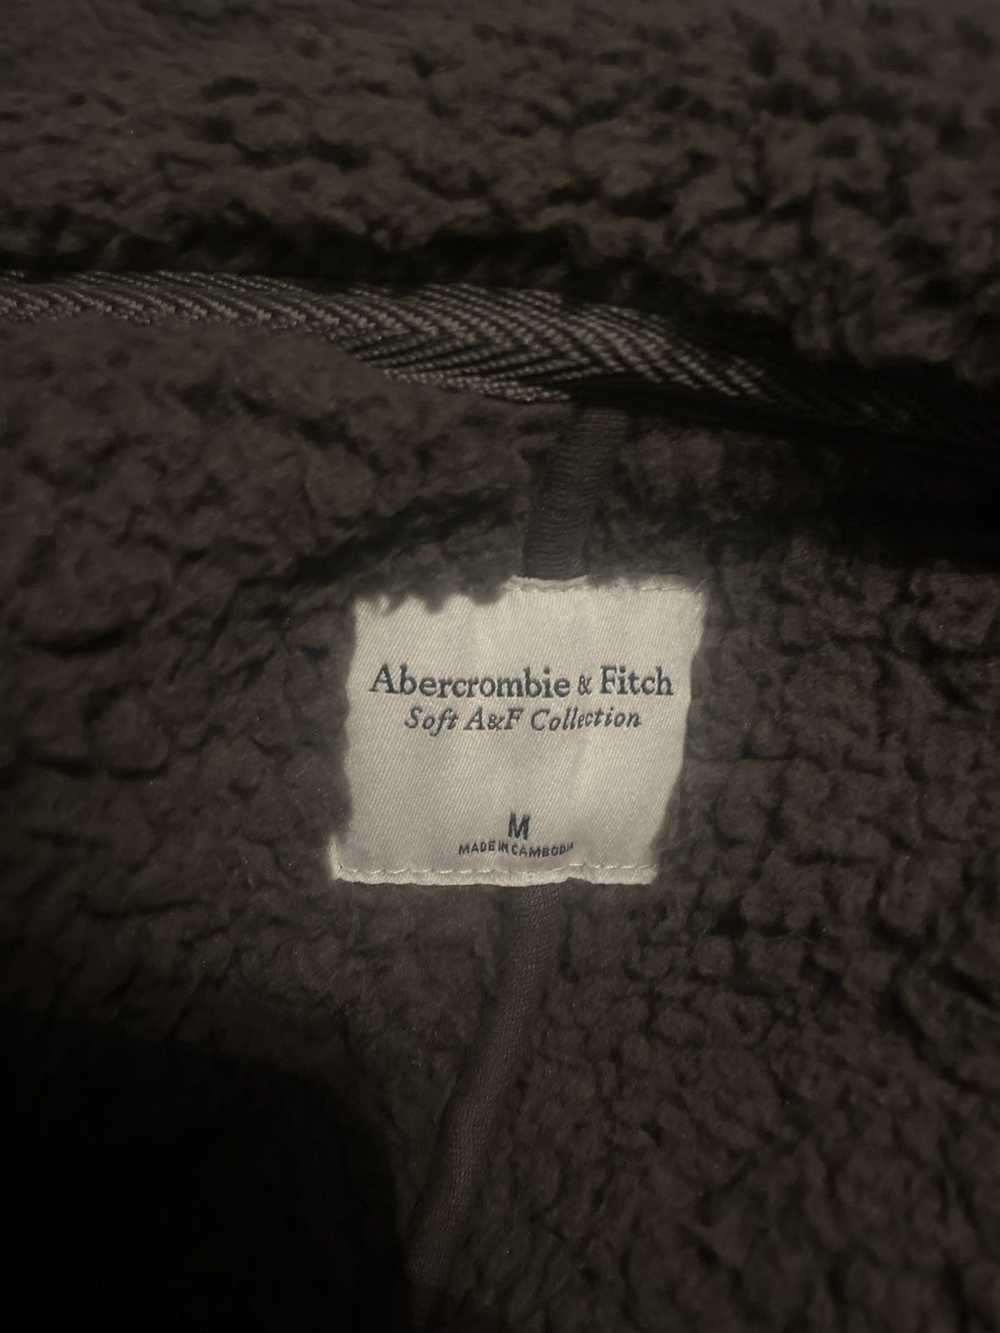 Abercrombie & Fitch Abercrombie & Fitch Fleece - image 3